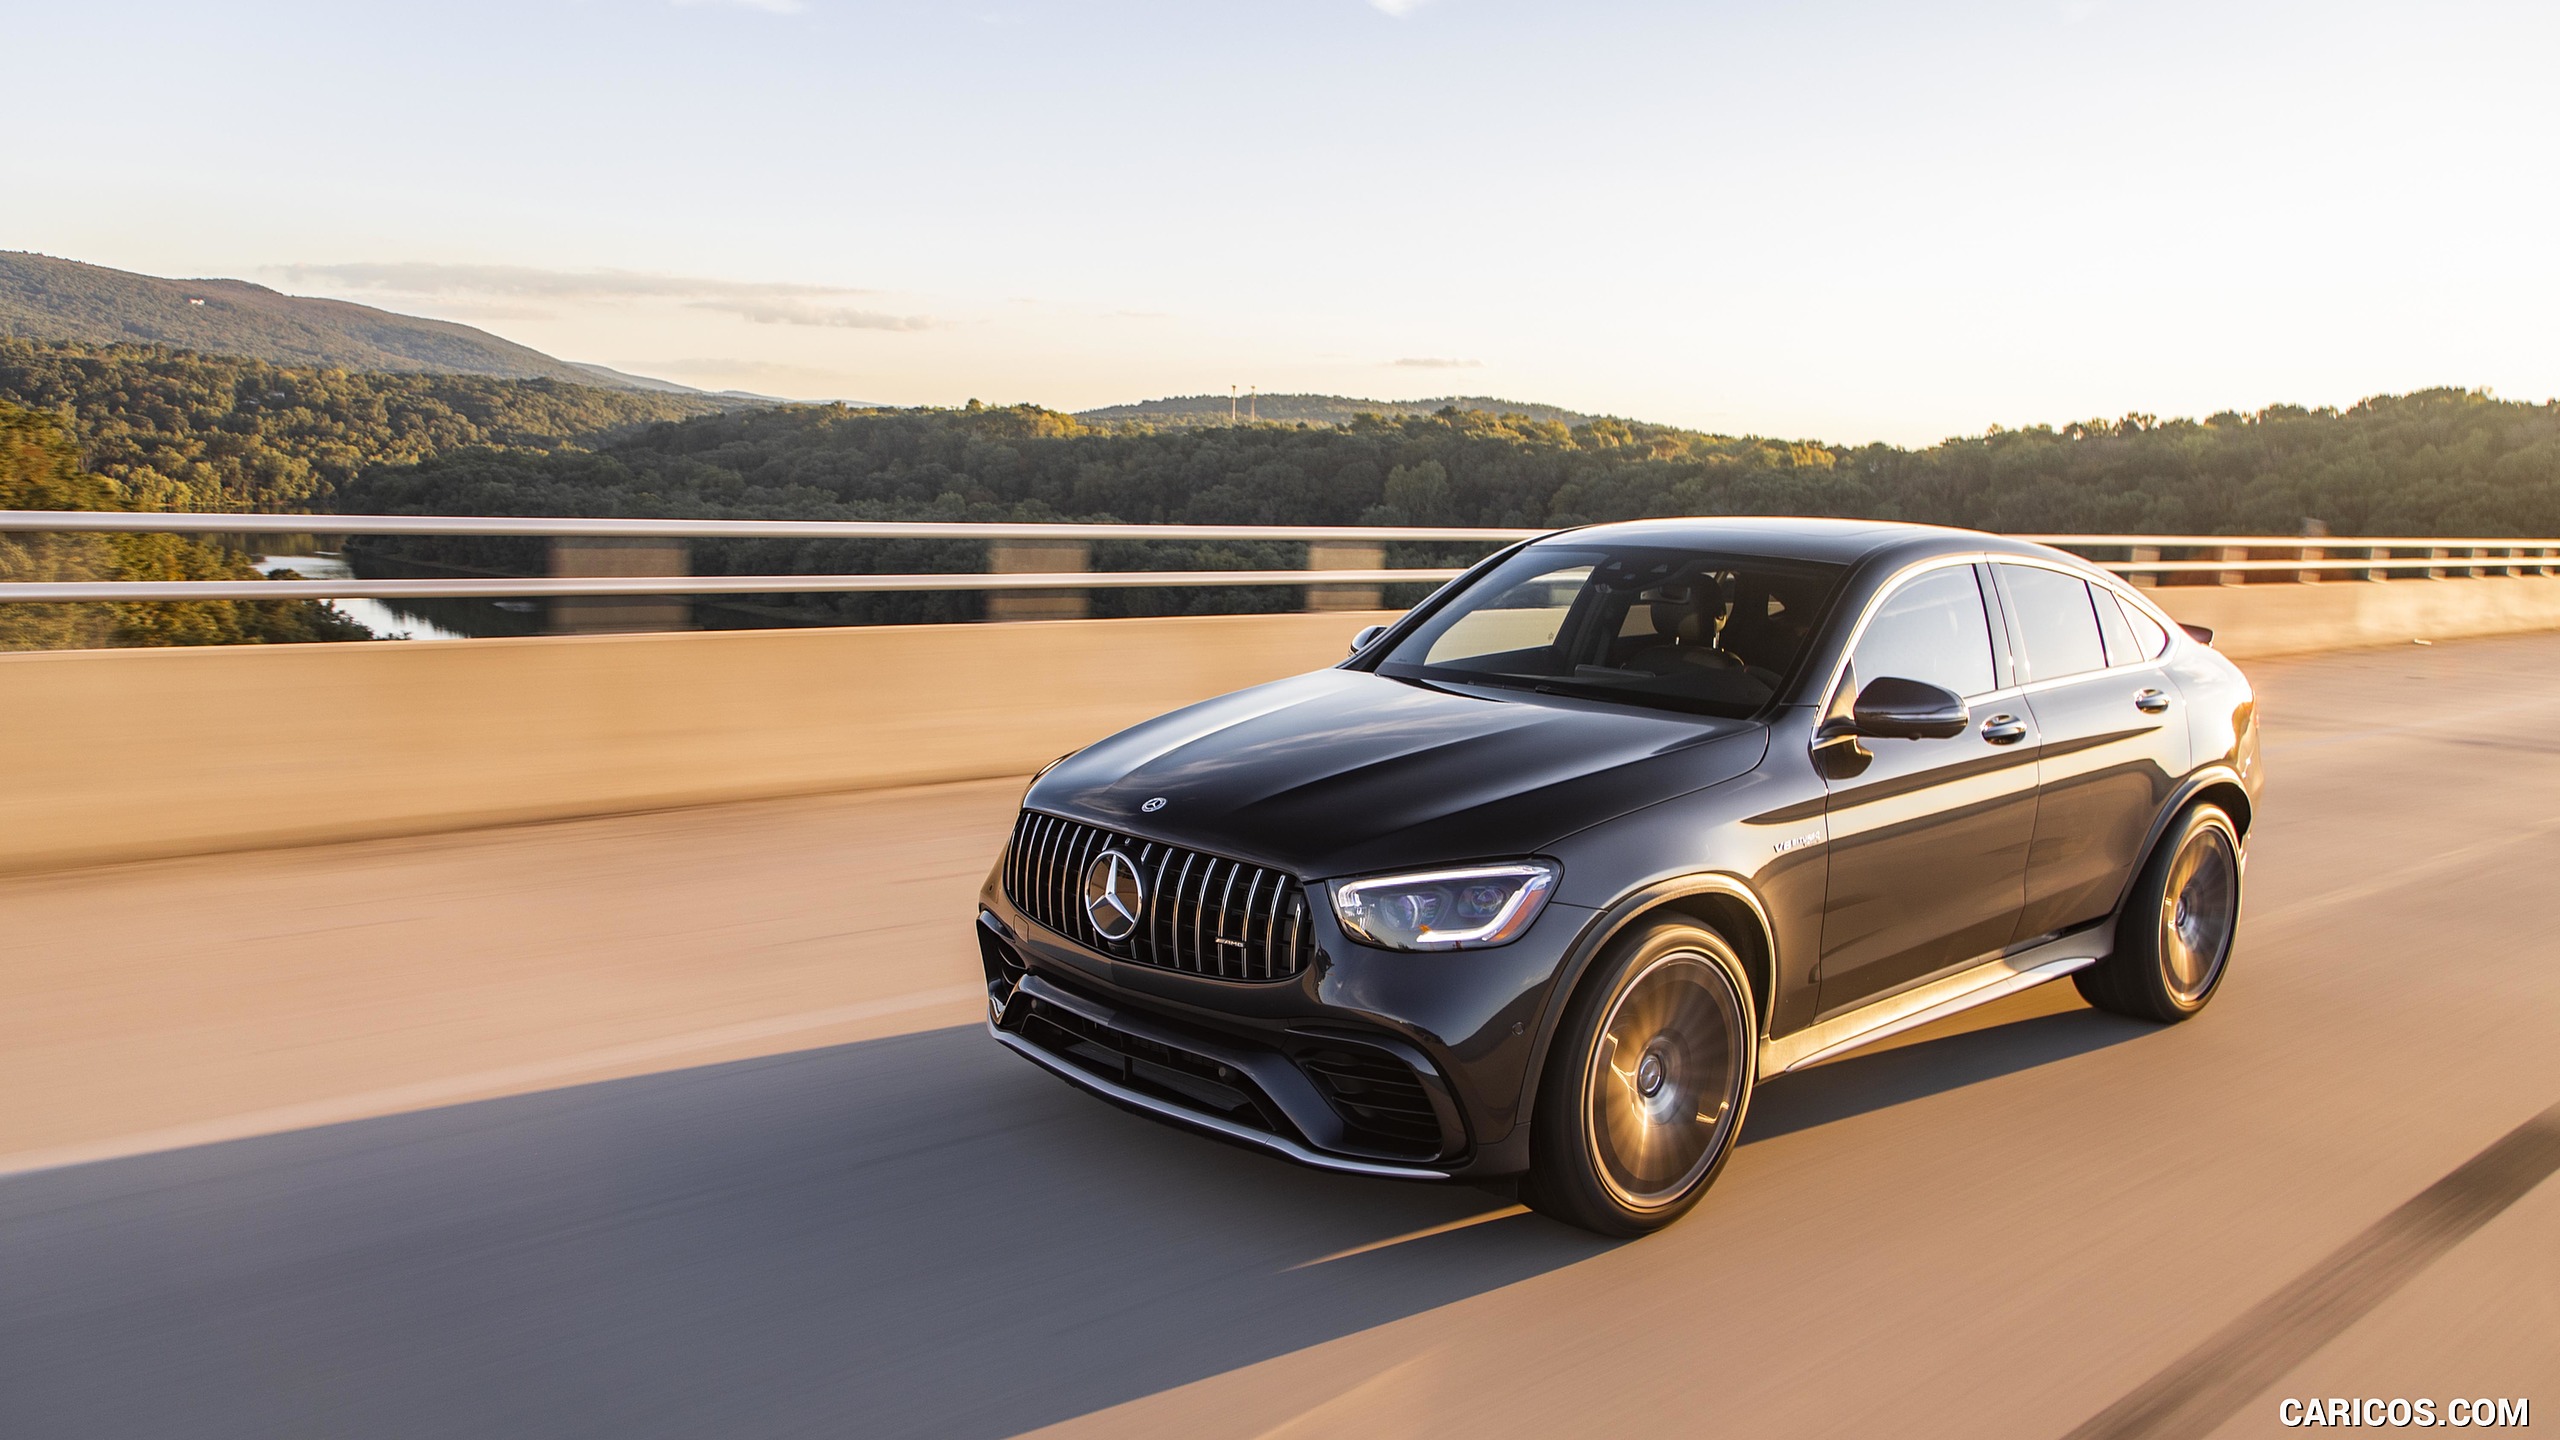 2020 Mercedes-AMG GLC 63 S Coupe (US-Spec) - Front Three-Quarter, #44 of 102